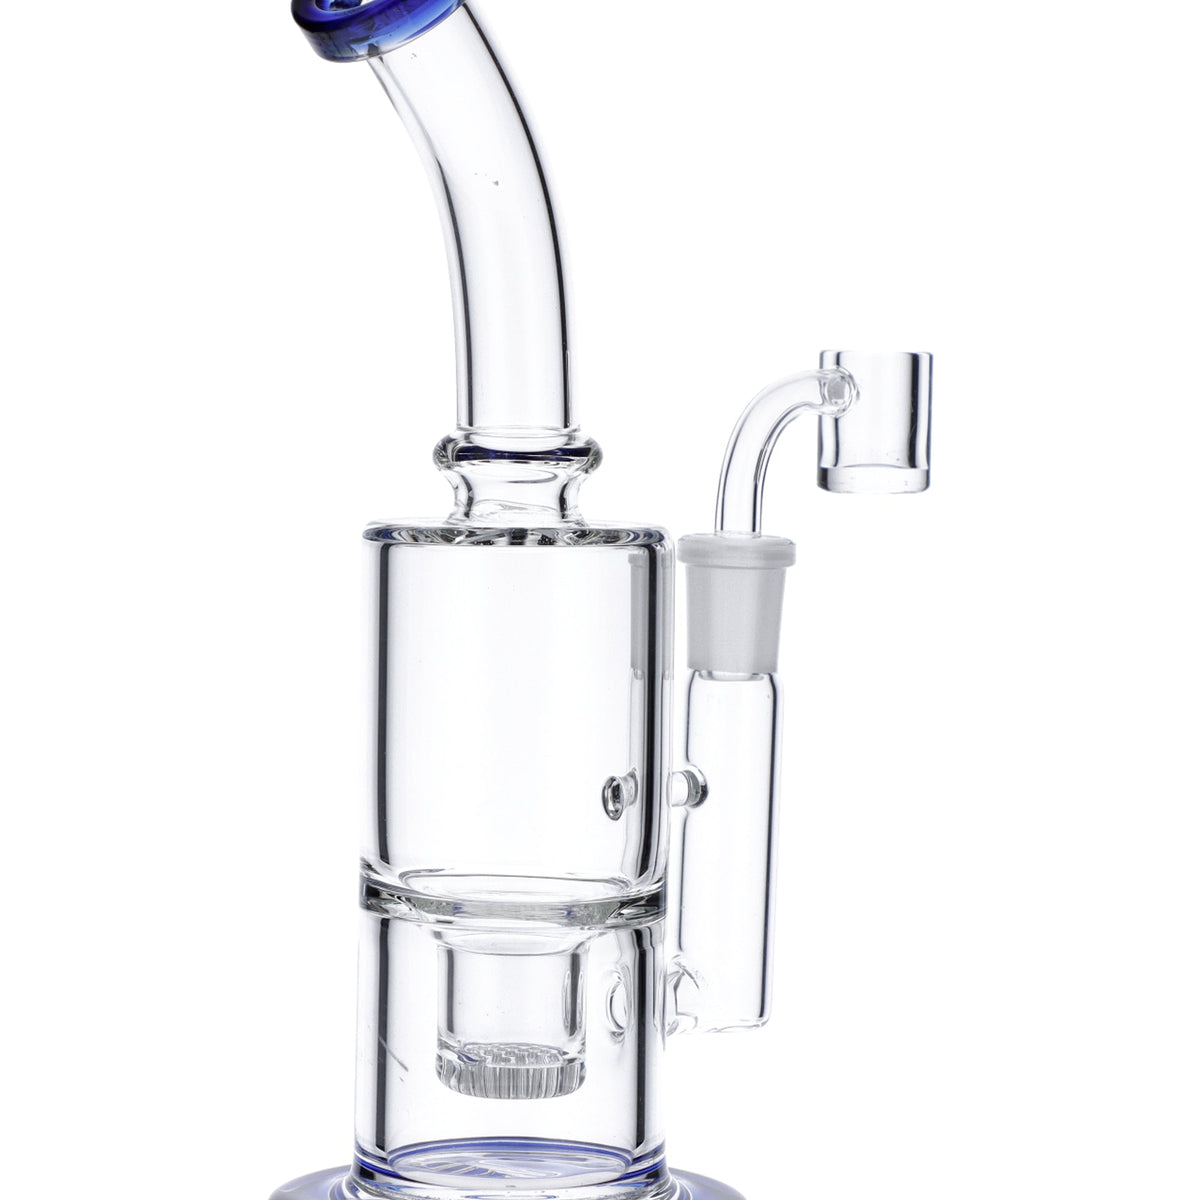 Newzenx Glass Fancy Oil Rigs Bubbler 8 Inch, For Smoking at Rs 750